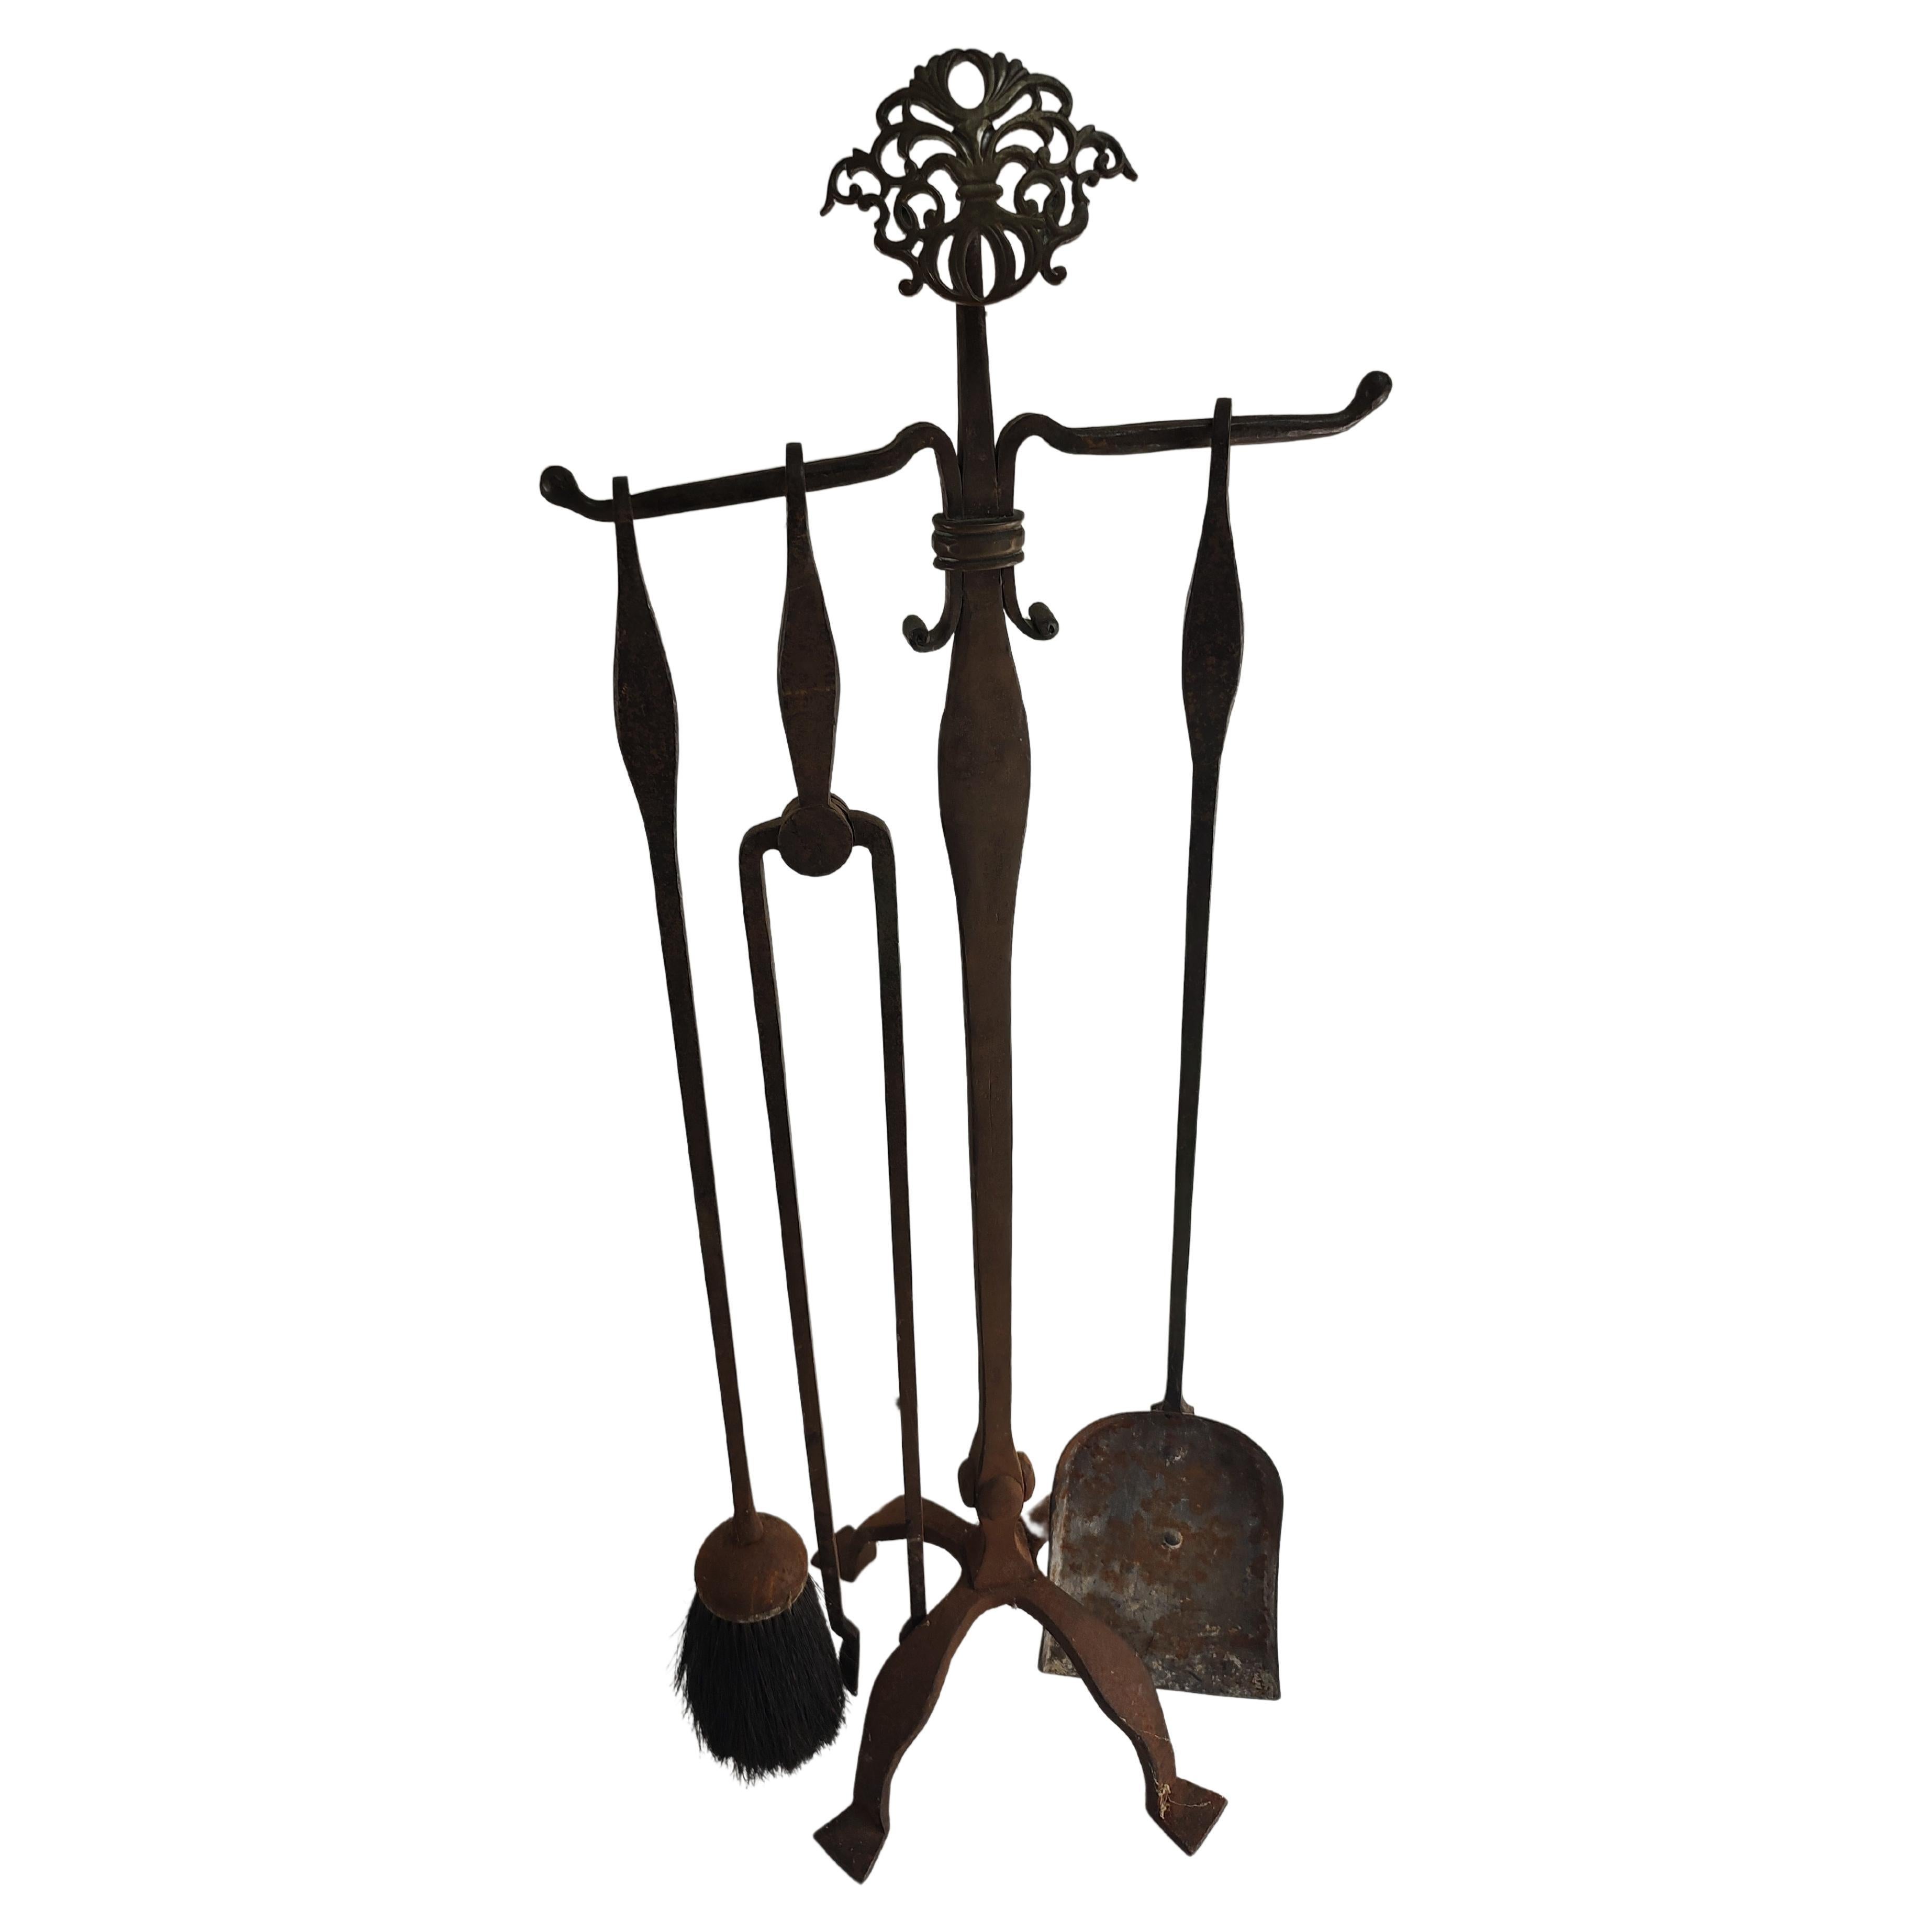 19th Century Hand Forged Iron Fireplace Tools 4 Piece Set For Sale